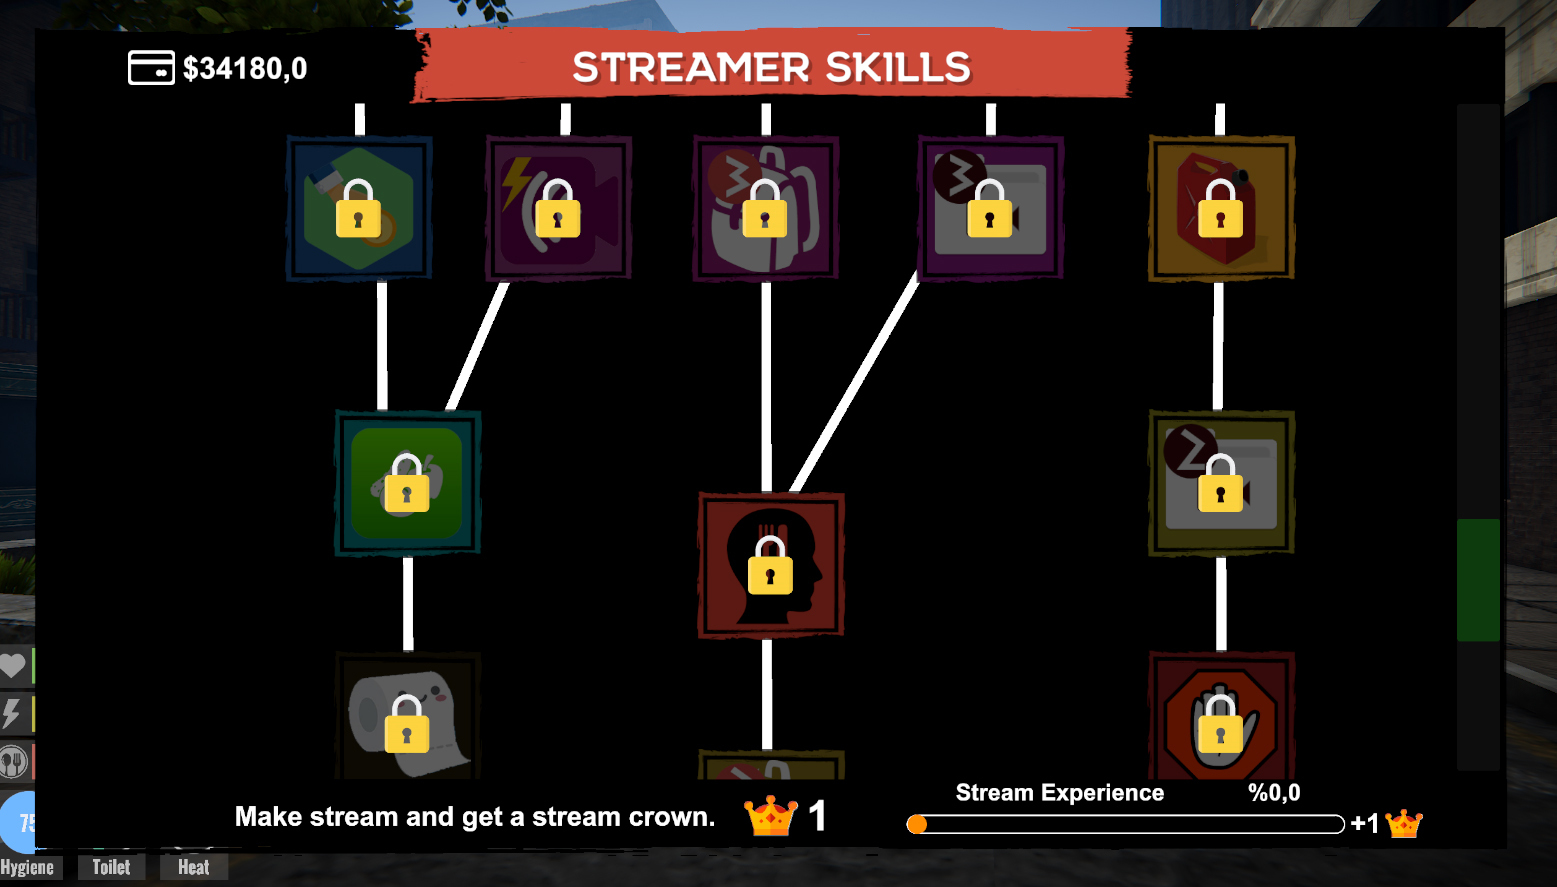 About: Streamer Life Simulator Game Advice (Google Play version)